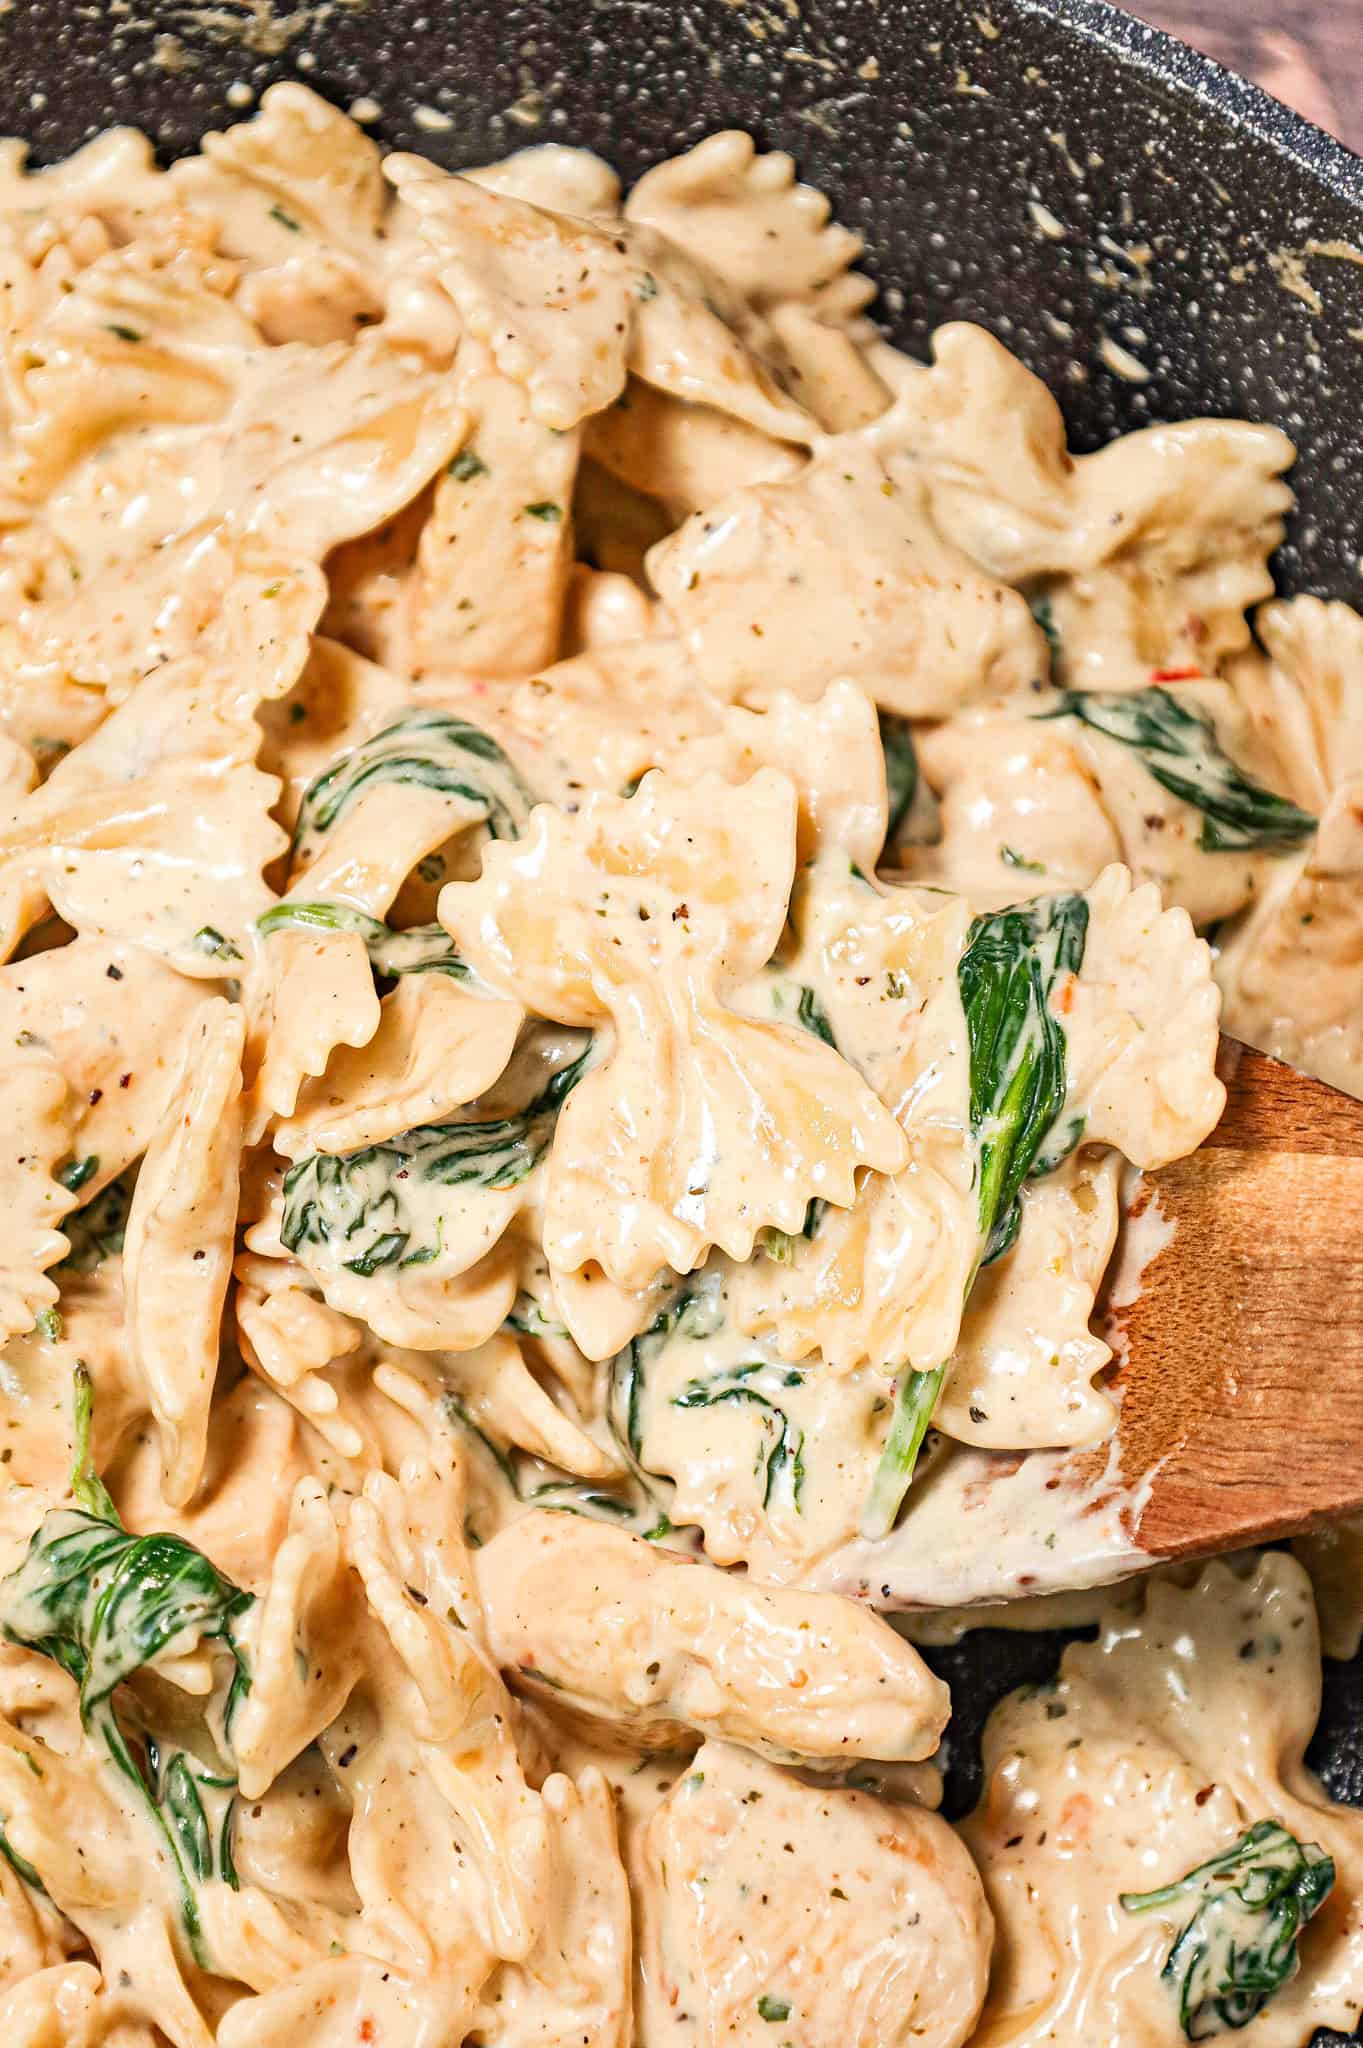 Chicken Spinach Alfredo is a creamy garlic parmesan pasta loaded with spinach and chicken breast chunks.